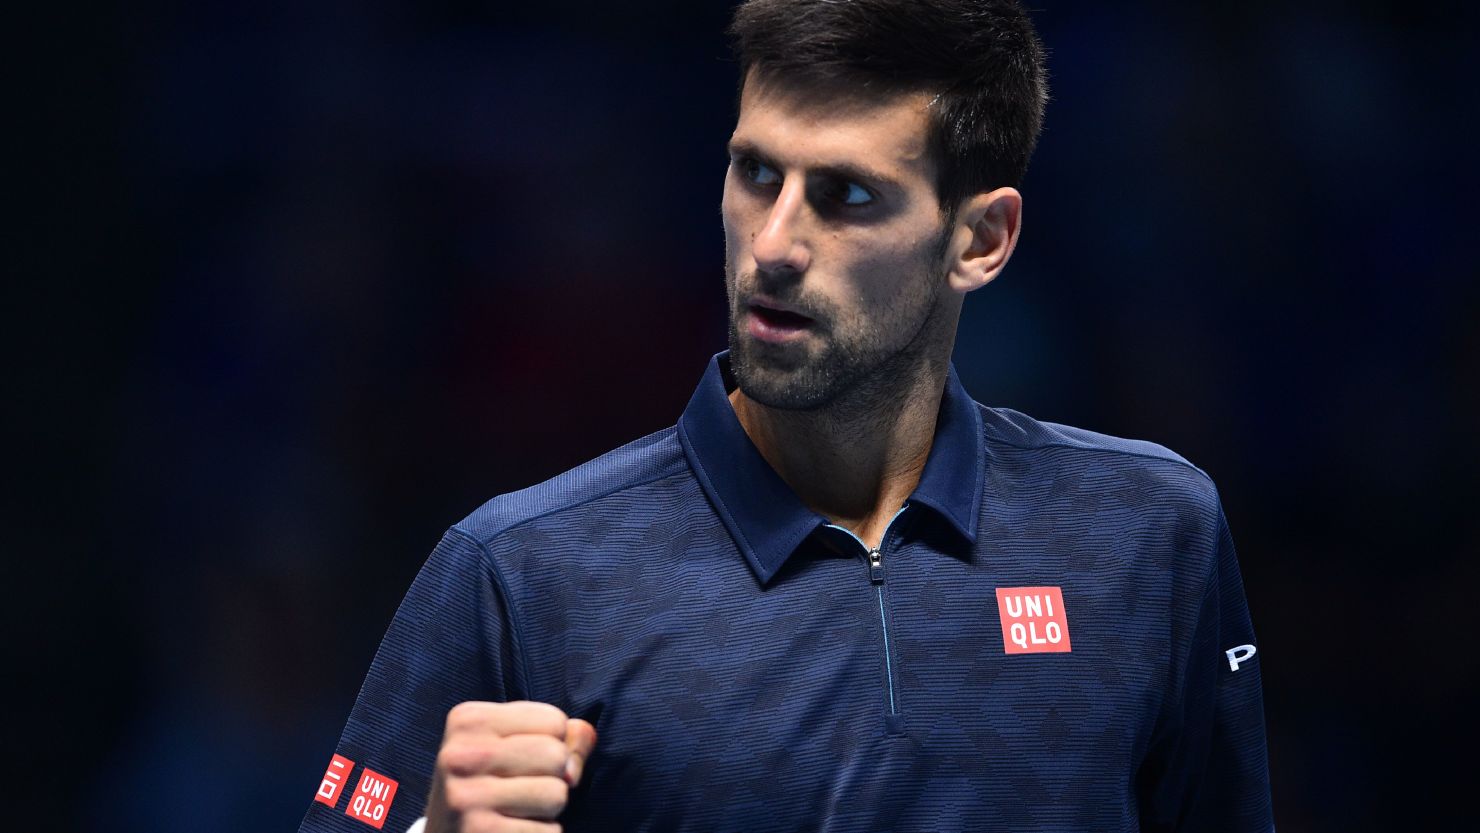 Serbia's Novak Djokovic celebrates a point against Austria's Dominic Thiem on his way to victory in his ATP World Tour Finals opener.